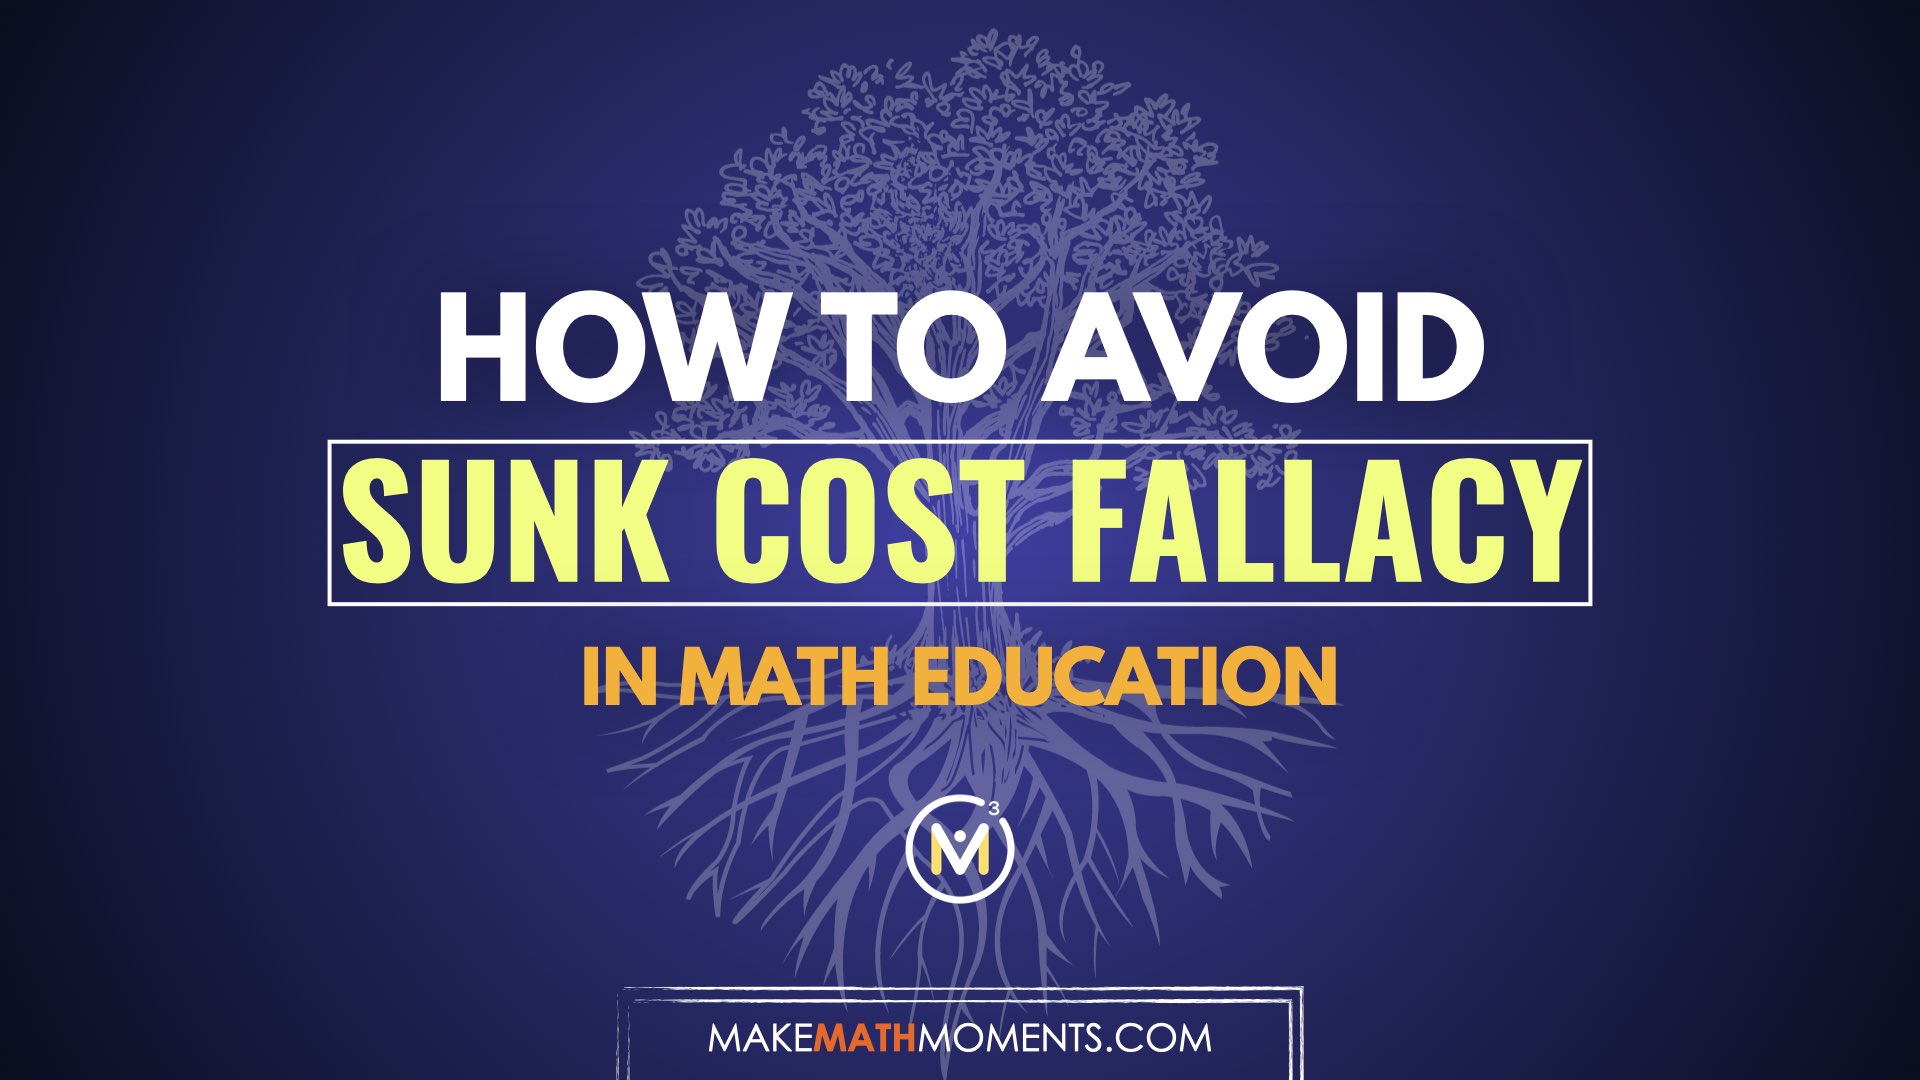 Avoiding The Sunk Cost Fallacy in Math Education: Lessons Learned From Being Scammed Online